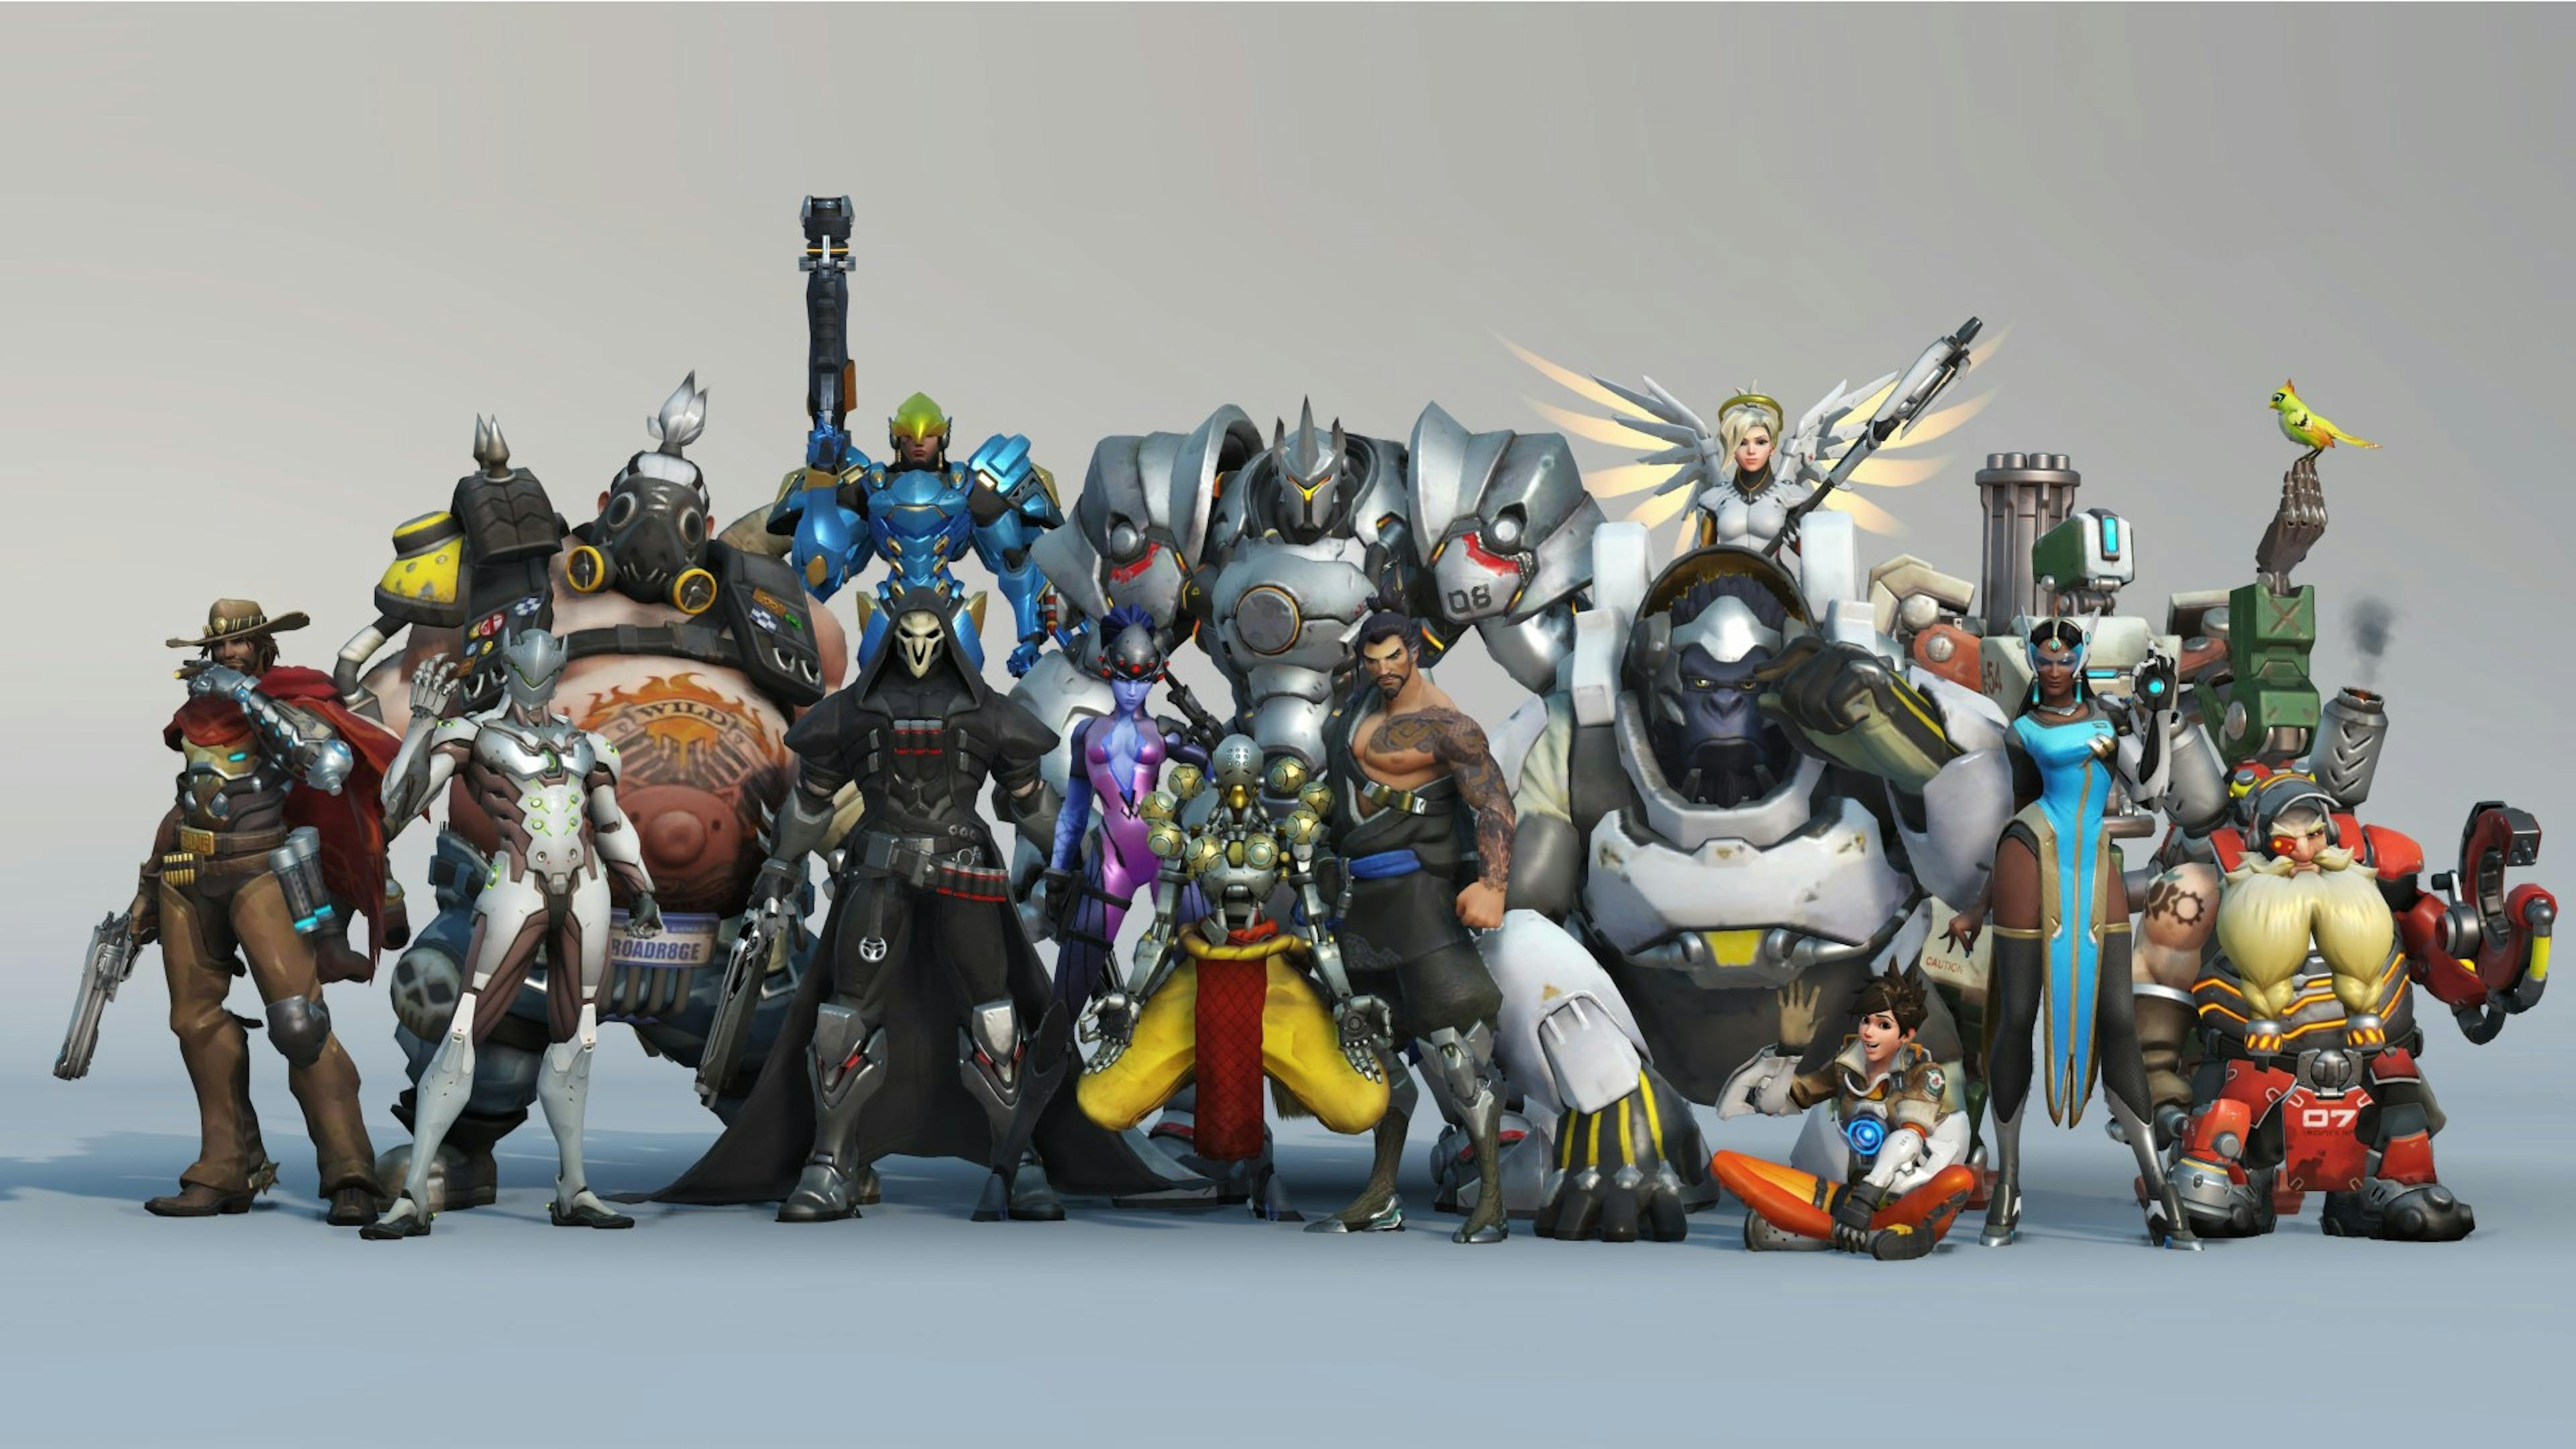 https://www.gamesradar.com/this-is-the-last-week-that-you-can-play-overwatch-before-its-gone-forever/